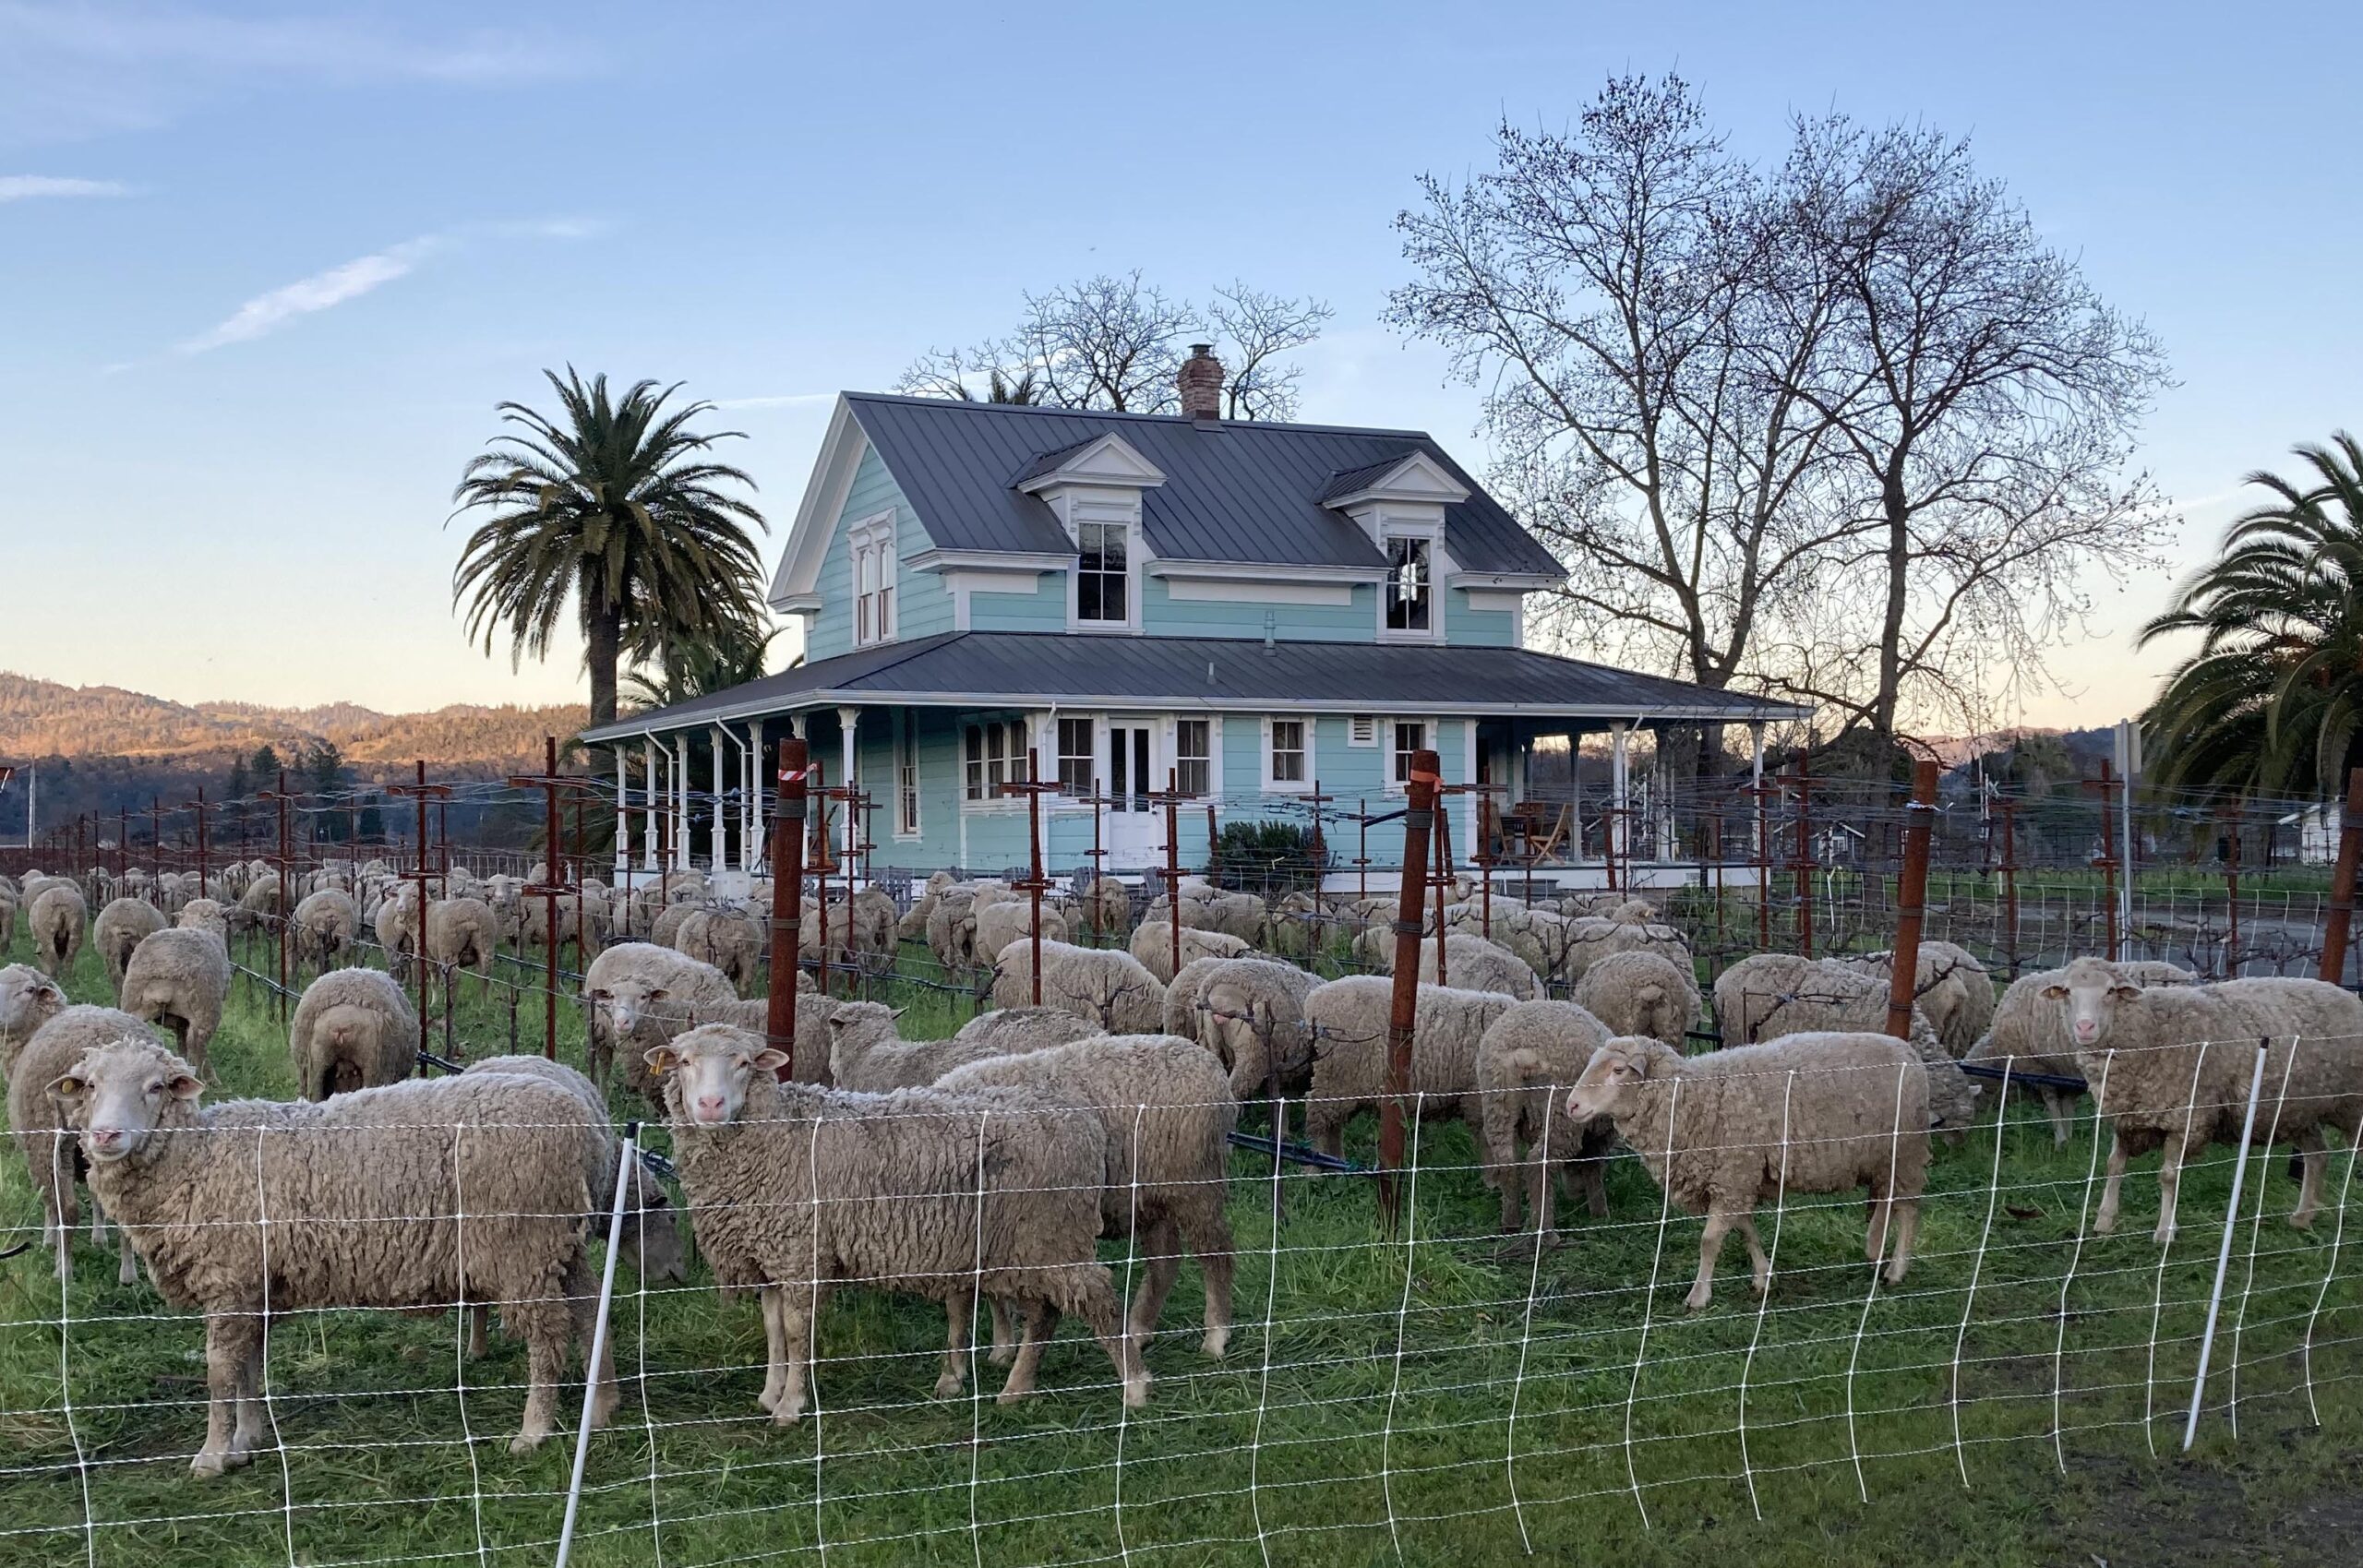 Sheep grazing in Kronos Vineyard in front of the Palm House